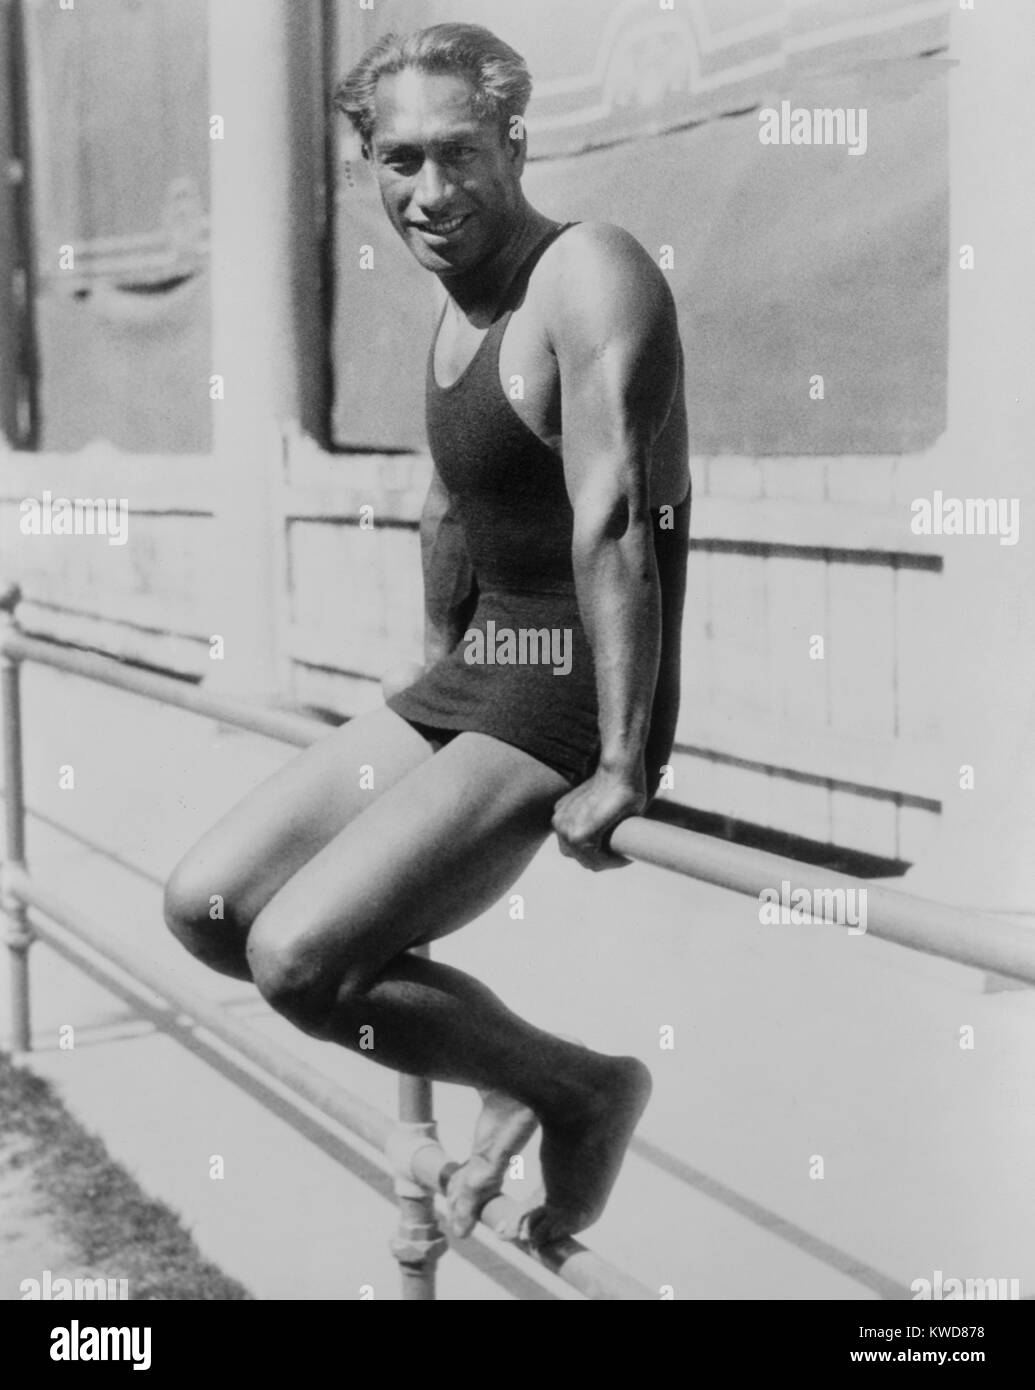 Duke Kahanamoku, Hawaiian Olympic swimmer in 1928. He won gold medals in the 1912 and 1920 Olympics. (BSLOC 2015 17 139) Stock Photo